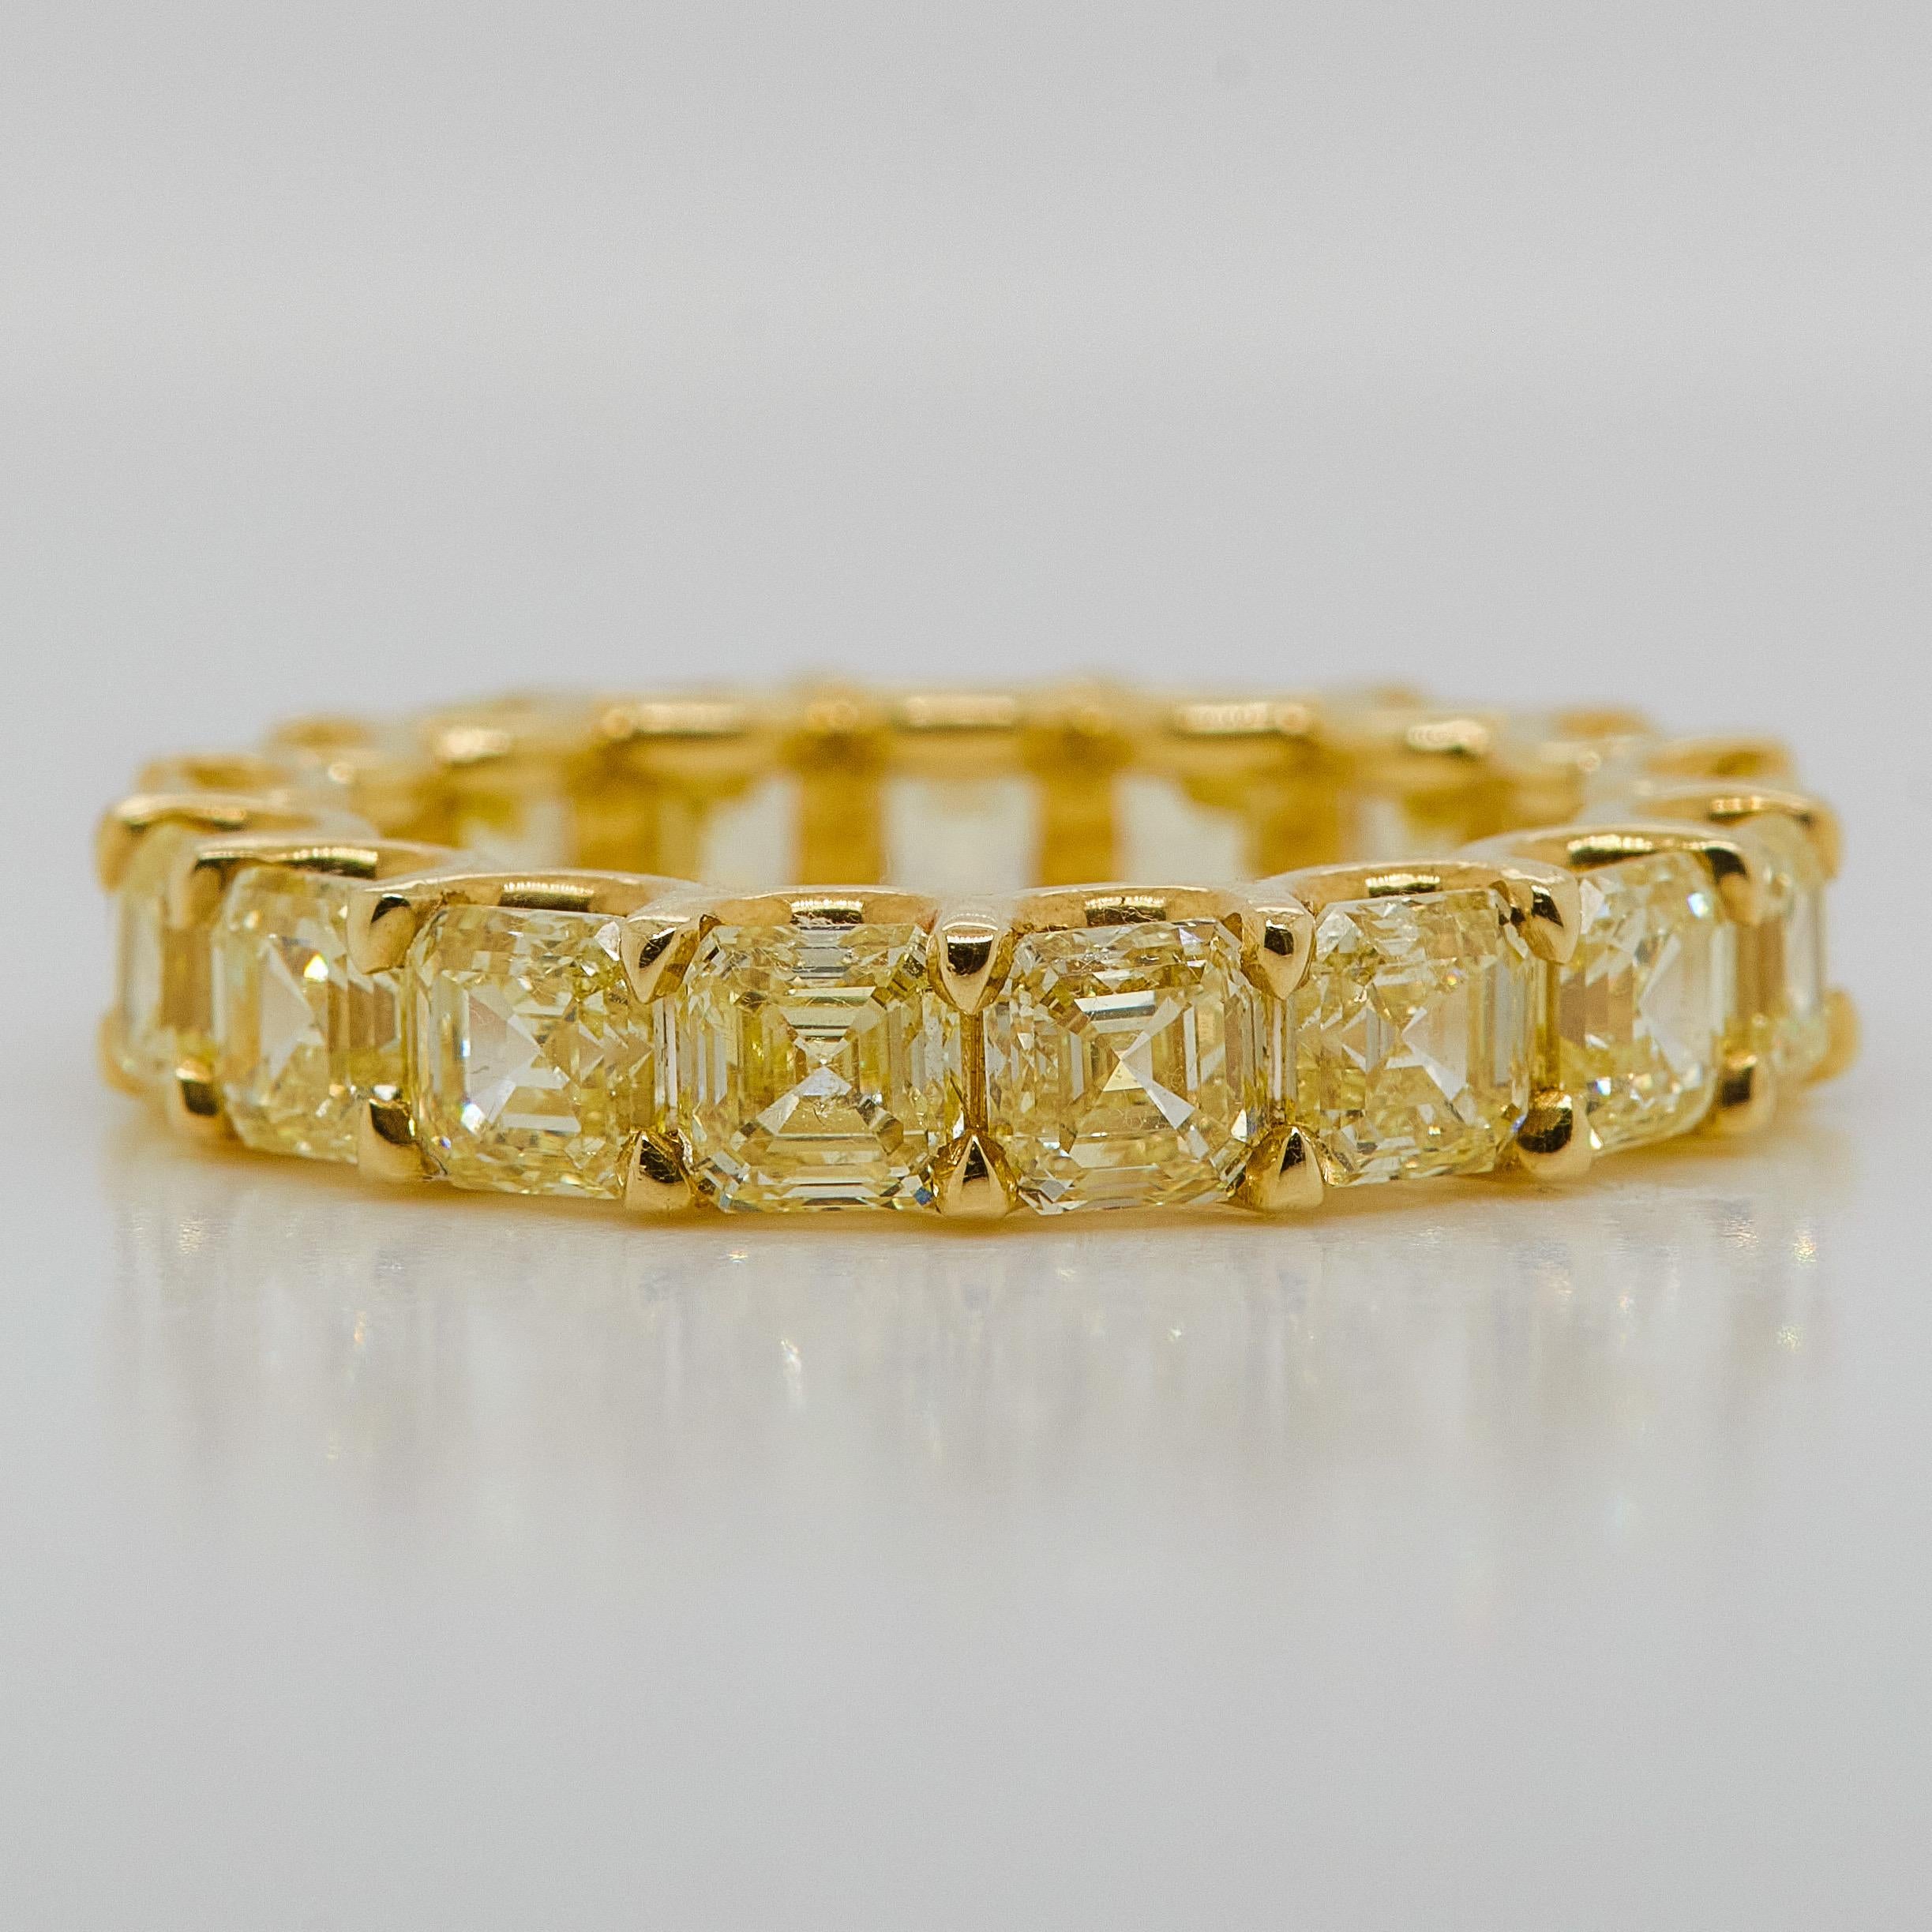 Showcasing a 7.07 carat Yellow Diamond Eternity band set in a polished 18k Rose gold mounting.
U-Prong Style With Asscher-cut Yellow Diamonds. Average diamond size is approximately 0.41 carat.

This ring would be suitable for Wedding Bands,